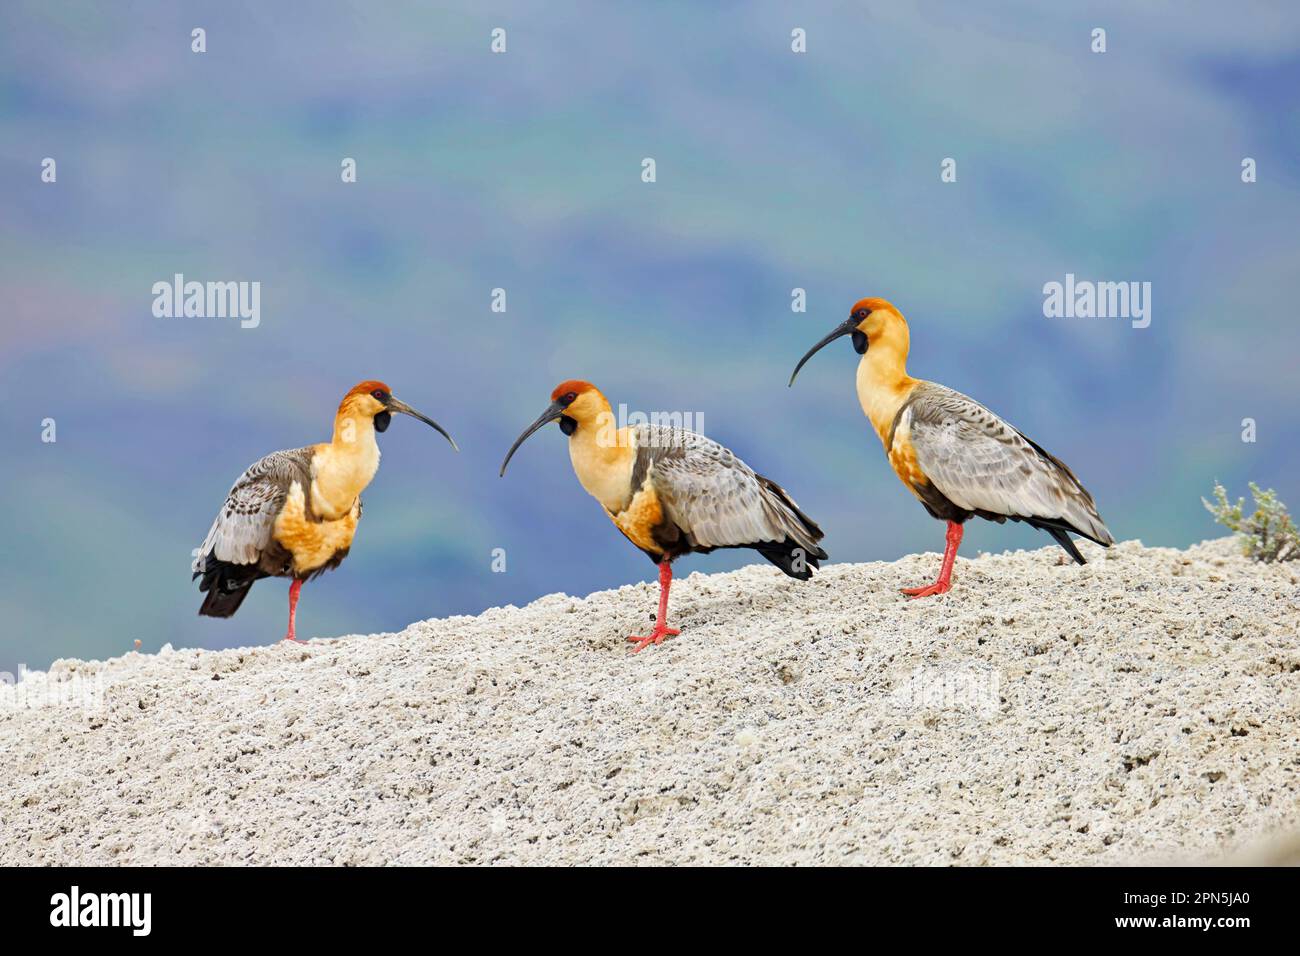 Black-faced Ibis (Theristicus melanopis) three adults, standing on calcium carbonate rocks, Torres del Paine N. P. Southern Patagonia, Chile Stock Photo